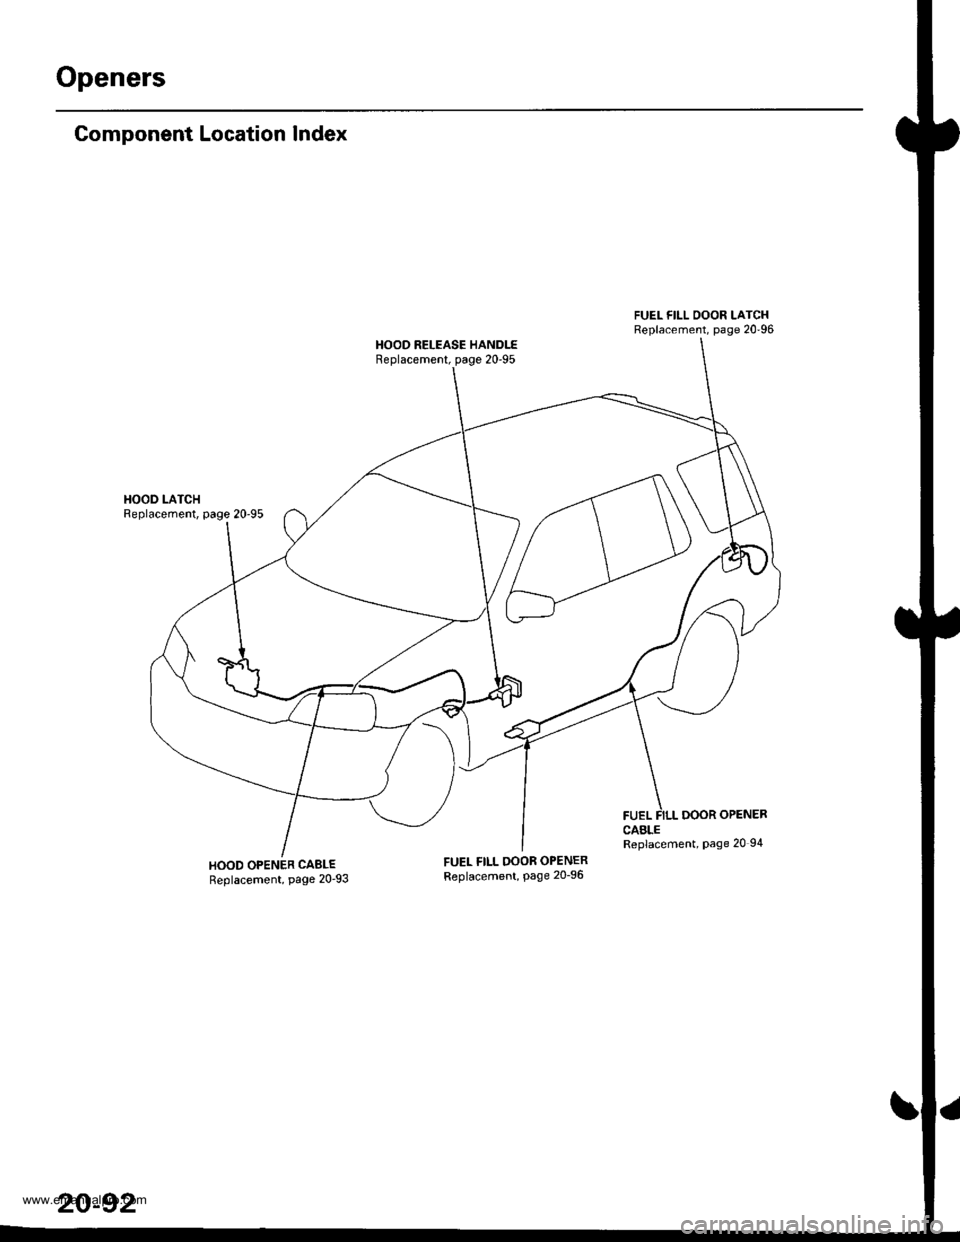 HONDA CR-V 1999 RD1-RD3 / 1.G Workshop Manual 
Openers
Component Location Index
HOOD LATCHReplacement, page 2095
HOOD OPENER CABLEReplacement, page 2093
FUEL FILL OOOR LATCHReplacement, page 2096
HOOD RELEASE HANDLEReplacement, page 2095
FUEL